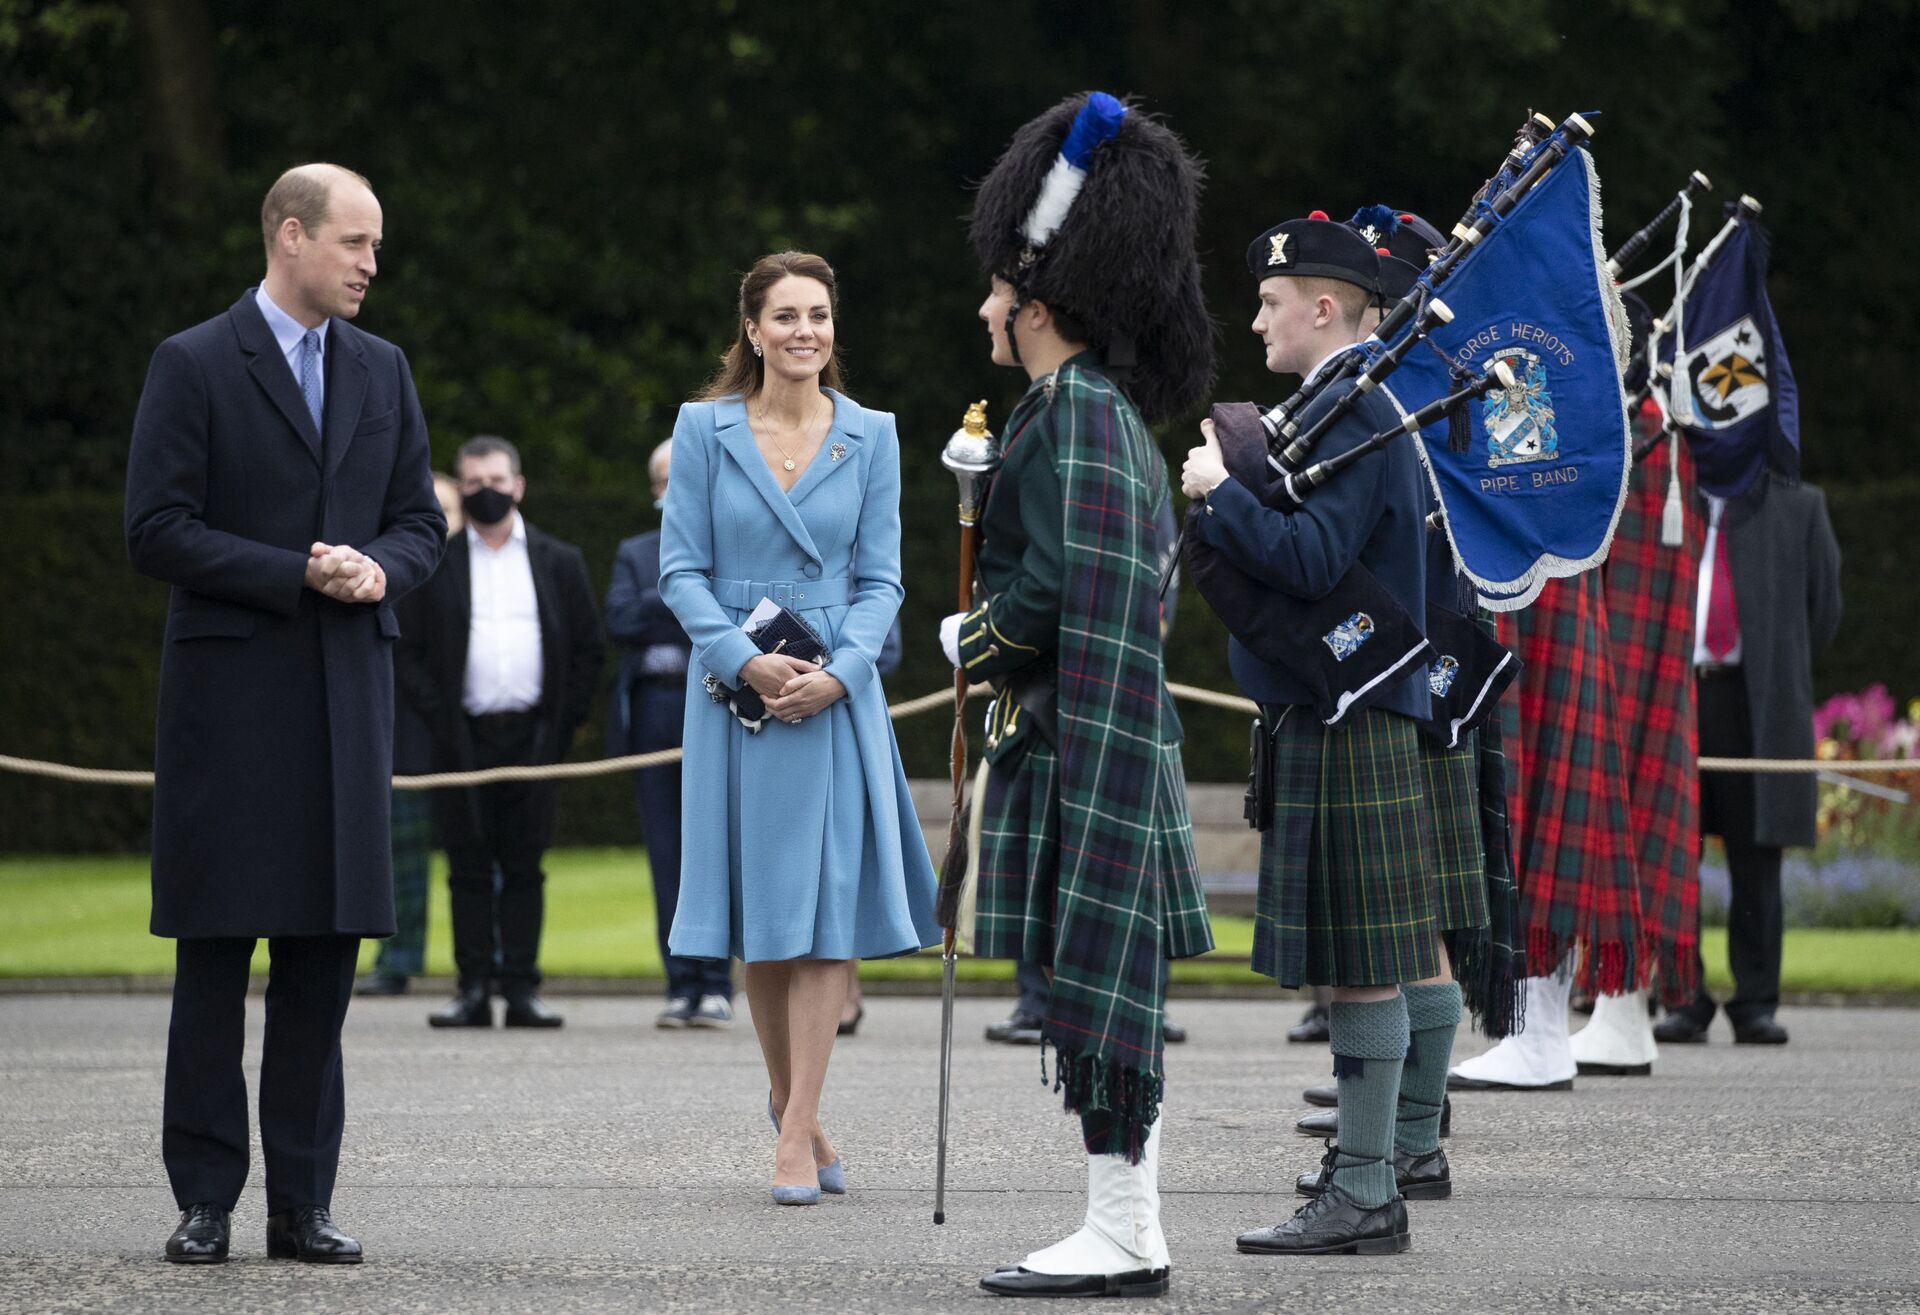 Prince William, Kate May be Tapped to 'Save the Union' as Royals Fear Politicians 'Losing Scotland' - Sputnik International, 1920, 06.06.2021